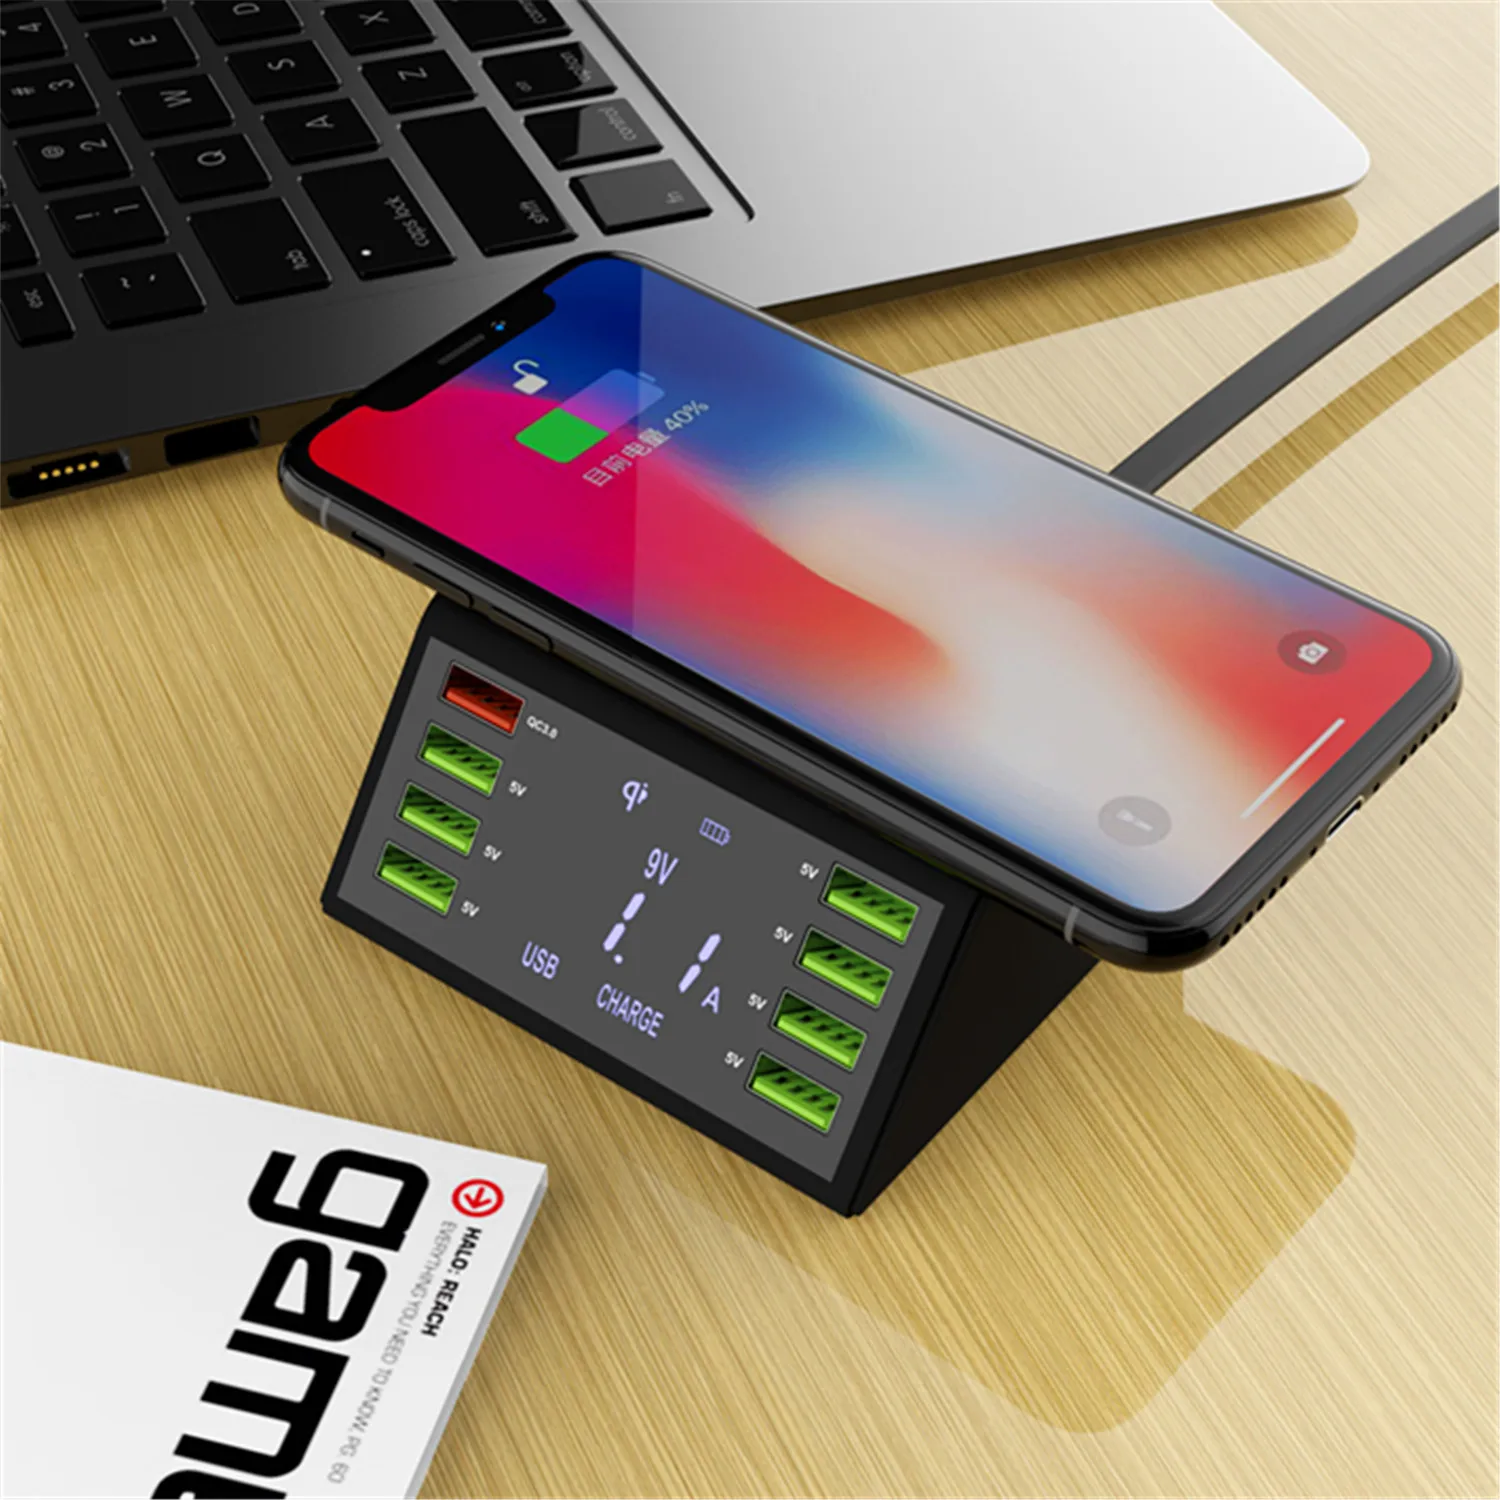 Fast Wireless Charger For Iphone Samsung Qc 3.0 Quick Charge Multi Usb Ports Charging Dock Station Desk Phone Organizer Multiple